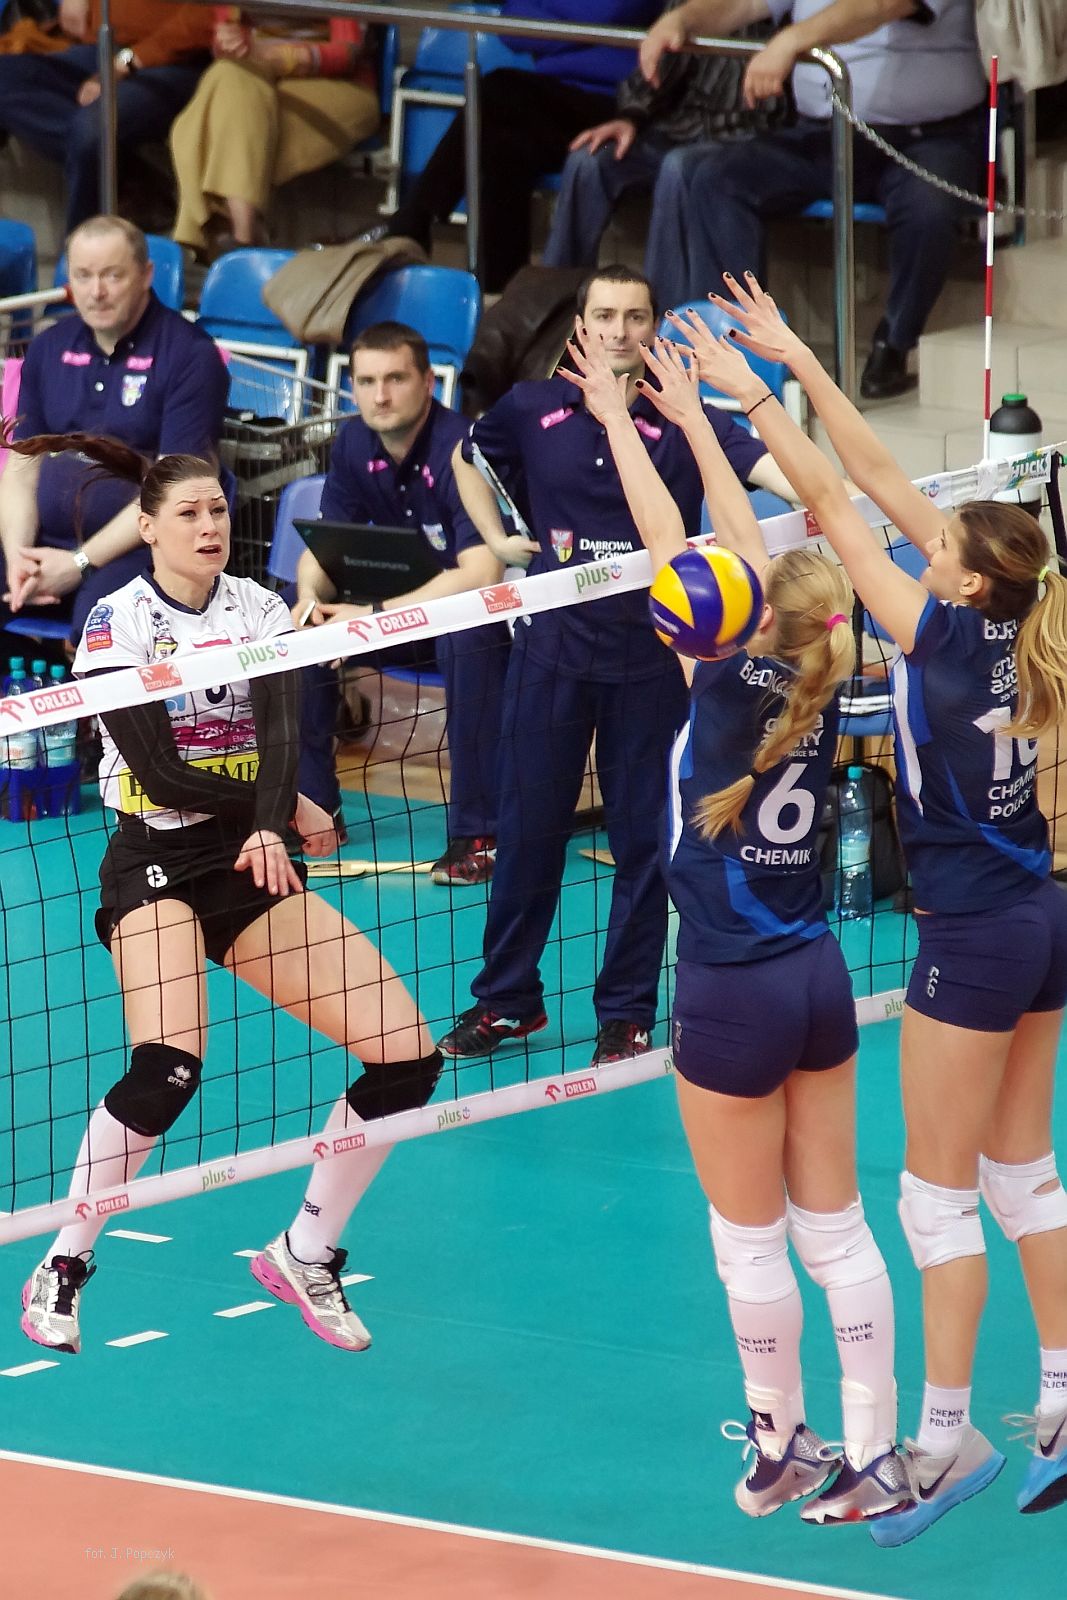 four female volleyball players are getting ready to serve the ball